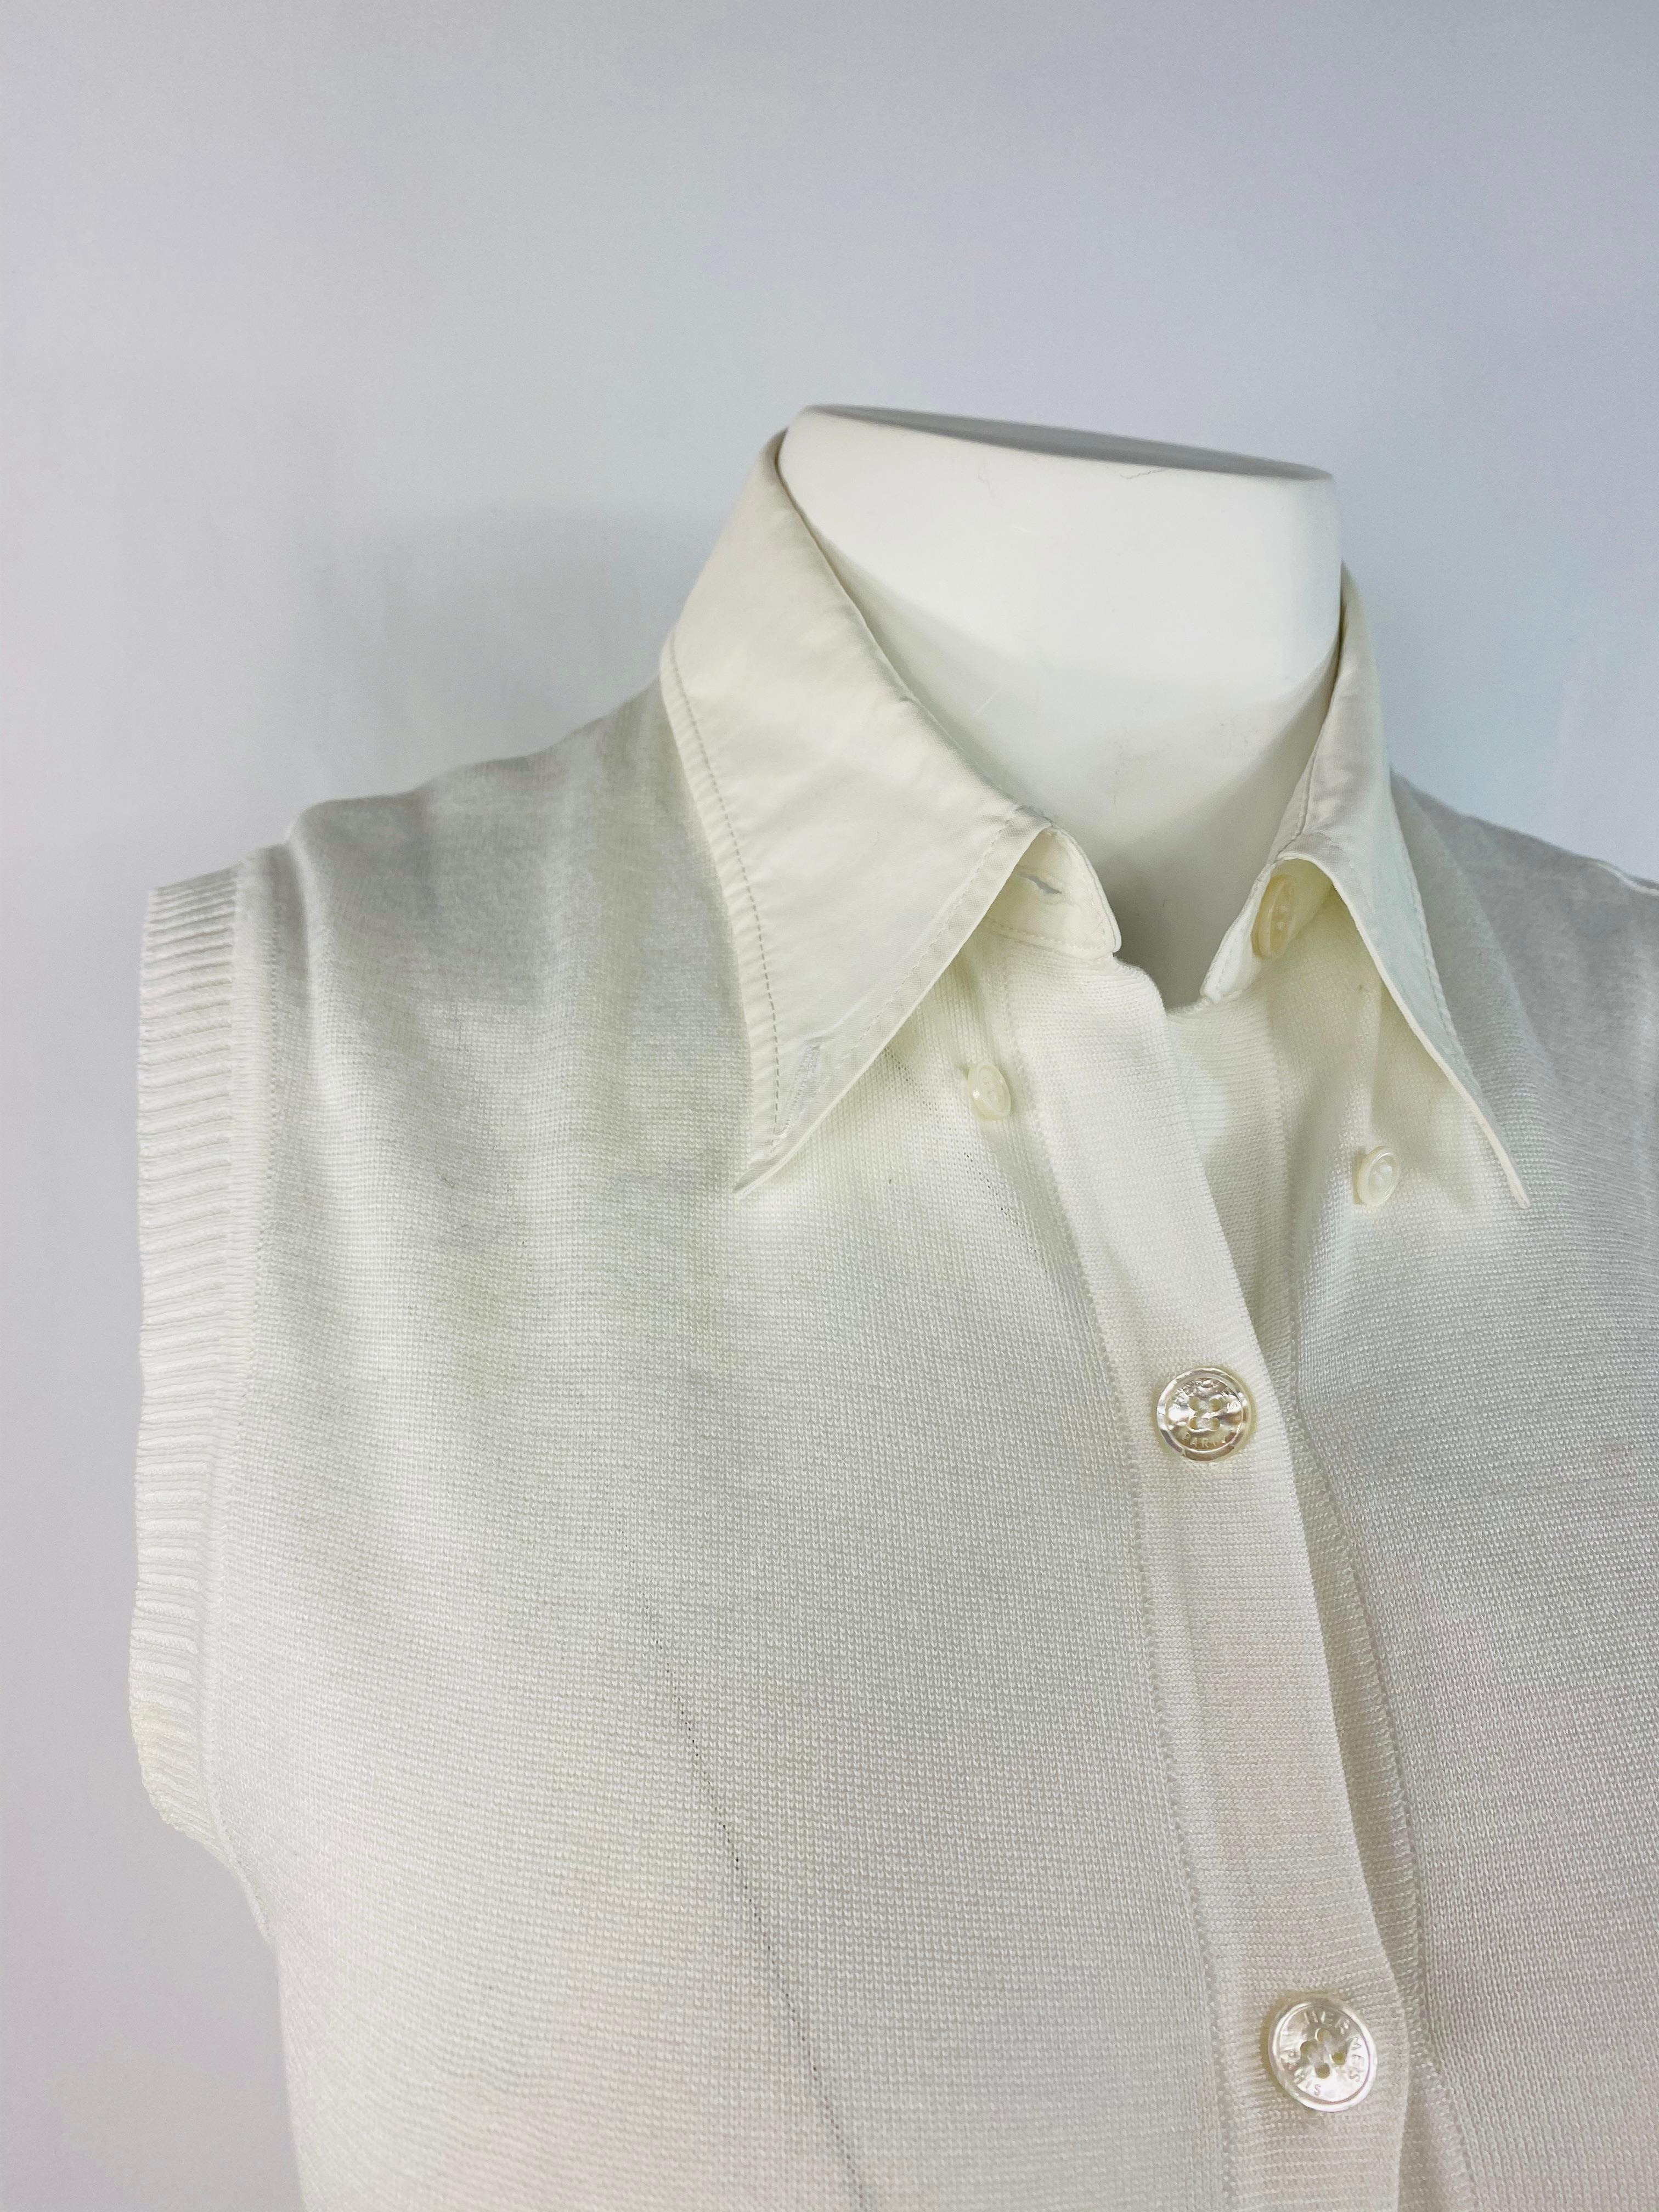 Product details:
Featuring 100% cotton white button down sleeveless top with collar detail.
Size 38.
Made in France.